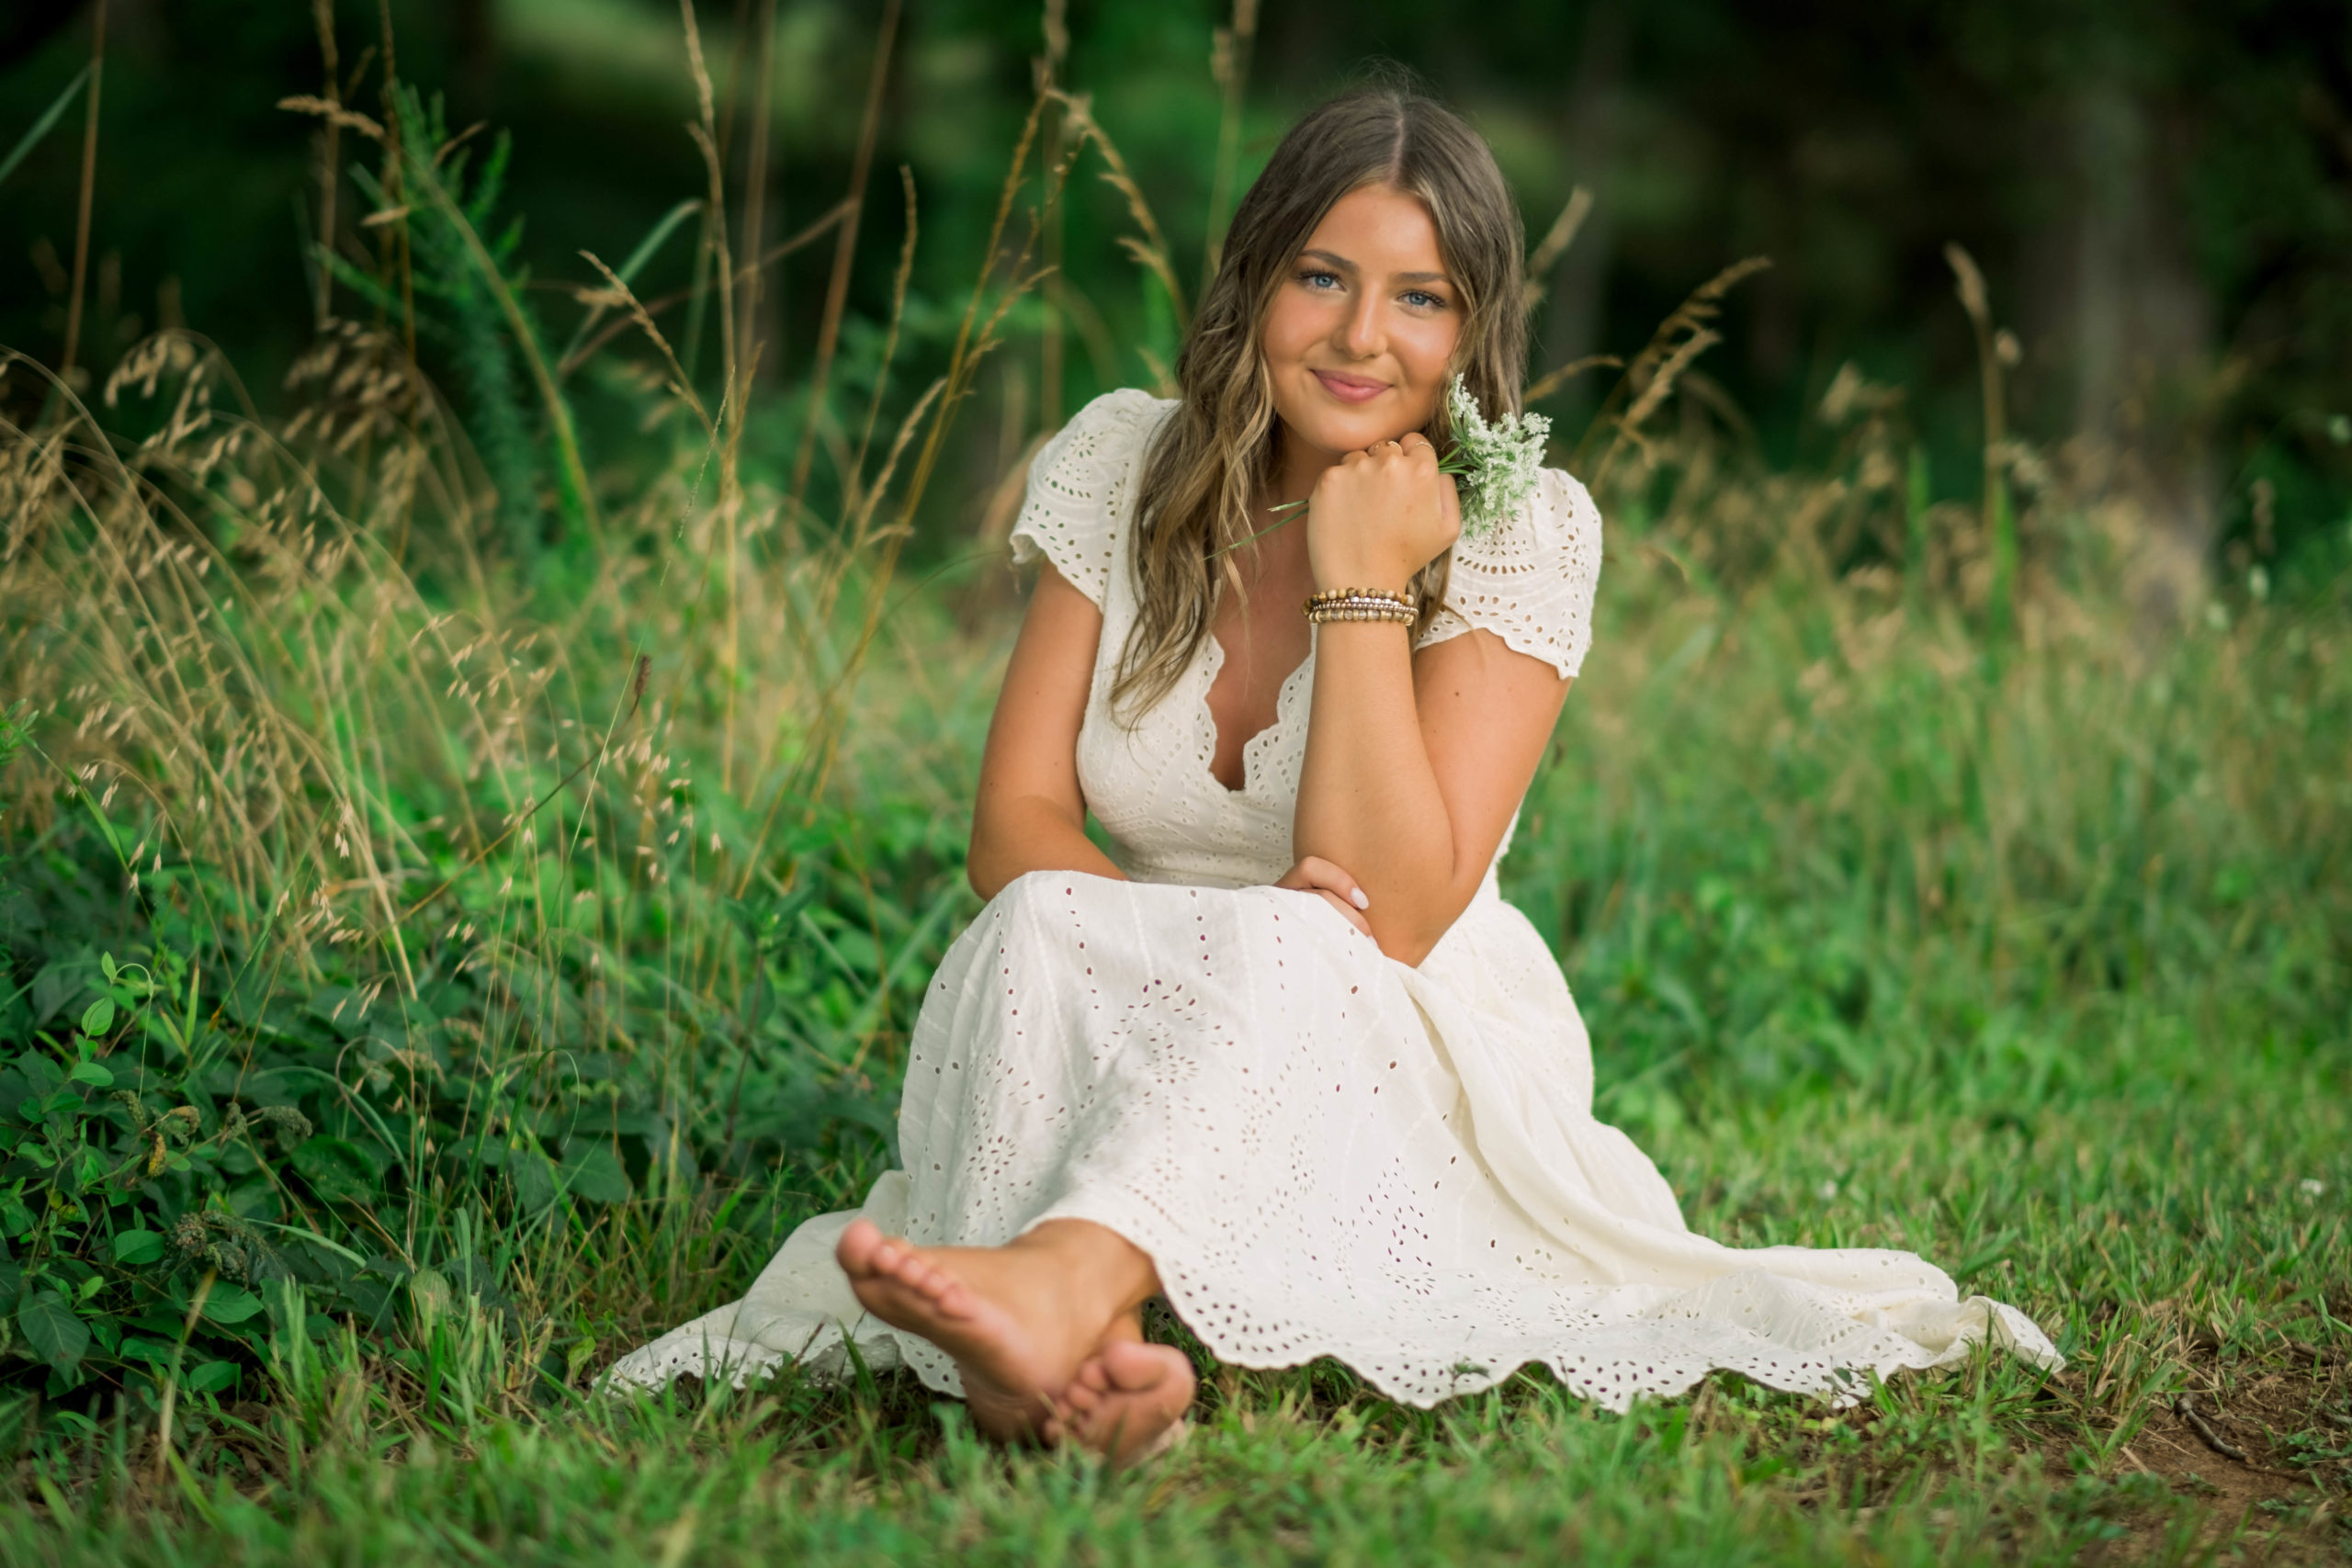 Young tennessee senior celebrating senior year in outdoor session with white dress on